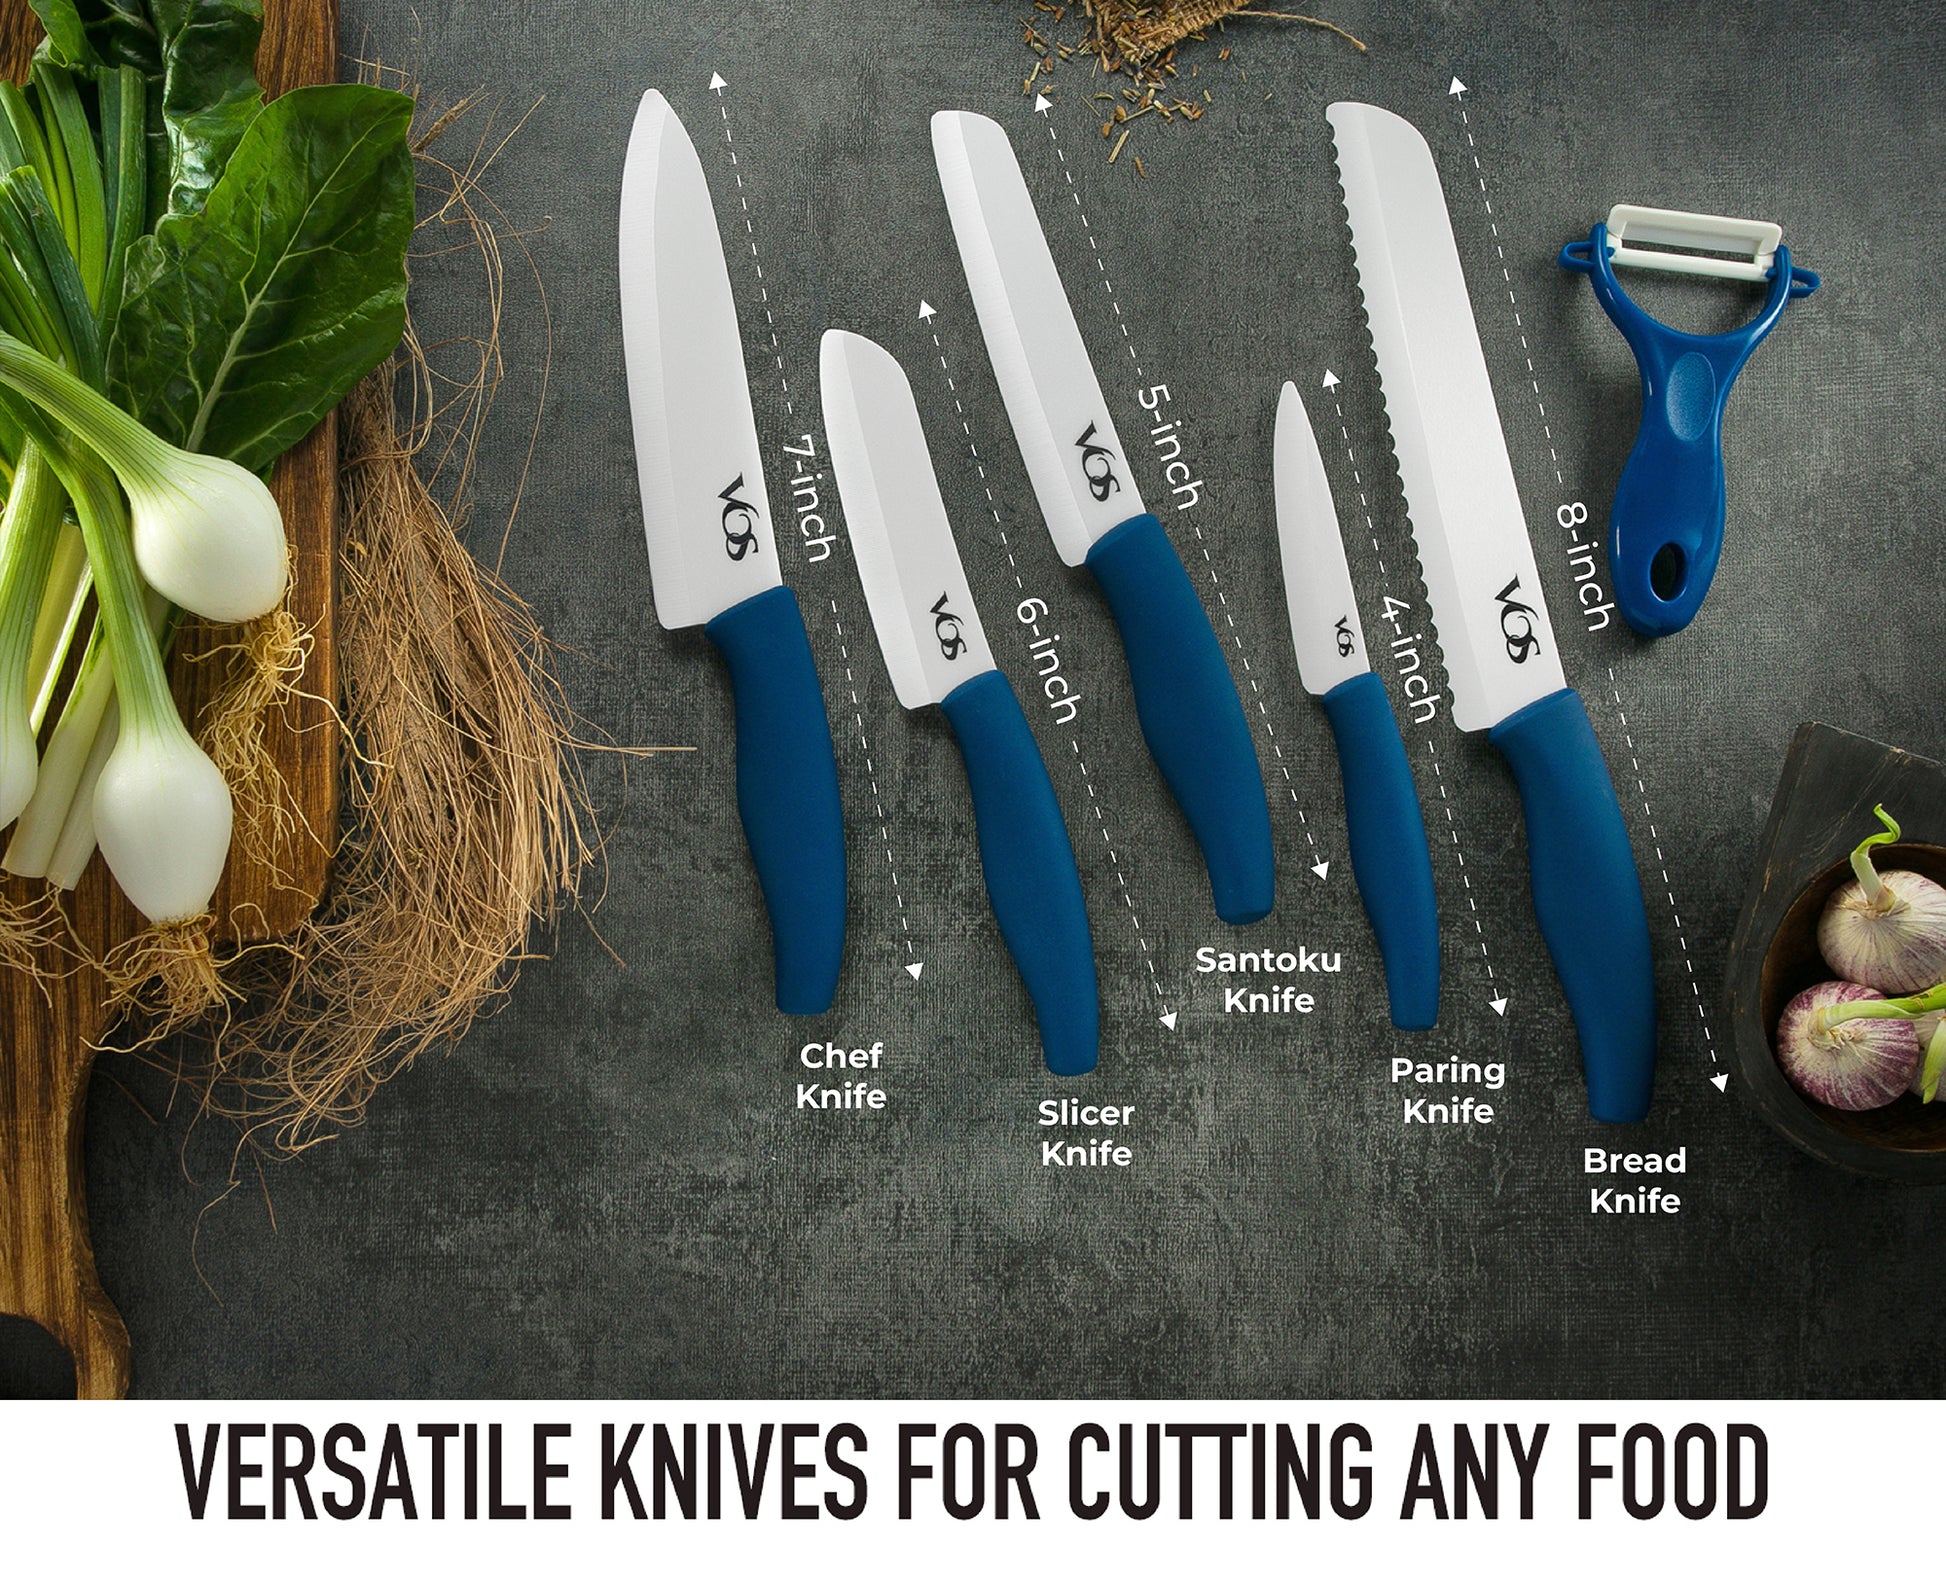 Tasty Cutlery Knife Set with Shears, Stainless Steel, Blue, 4 Piece 